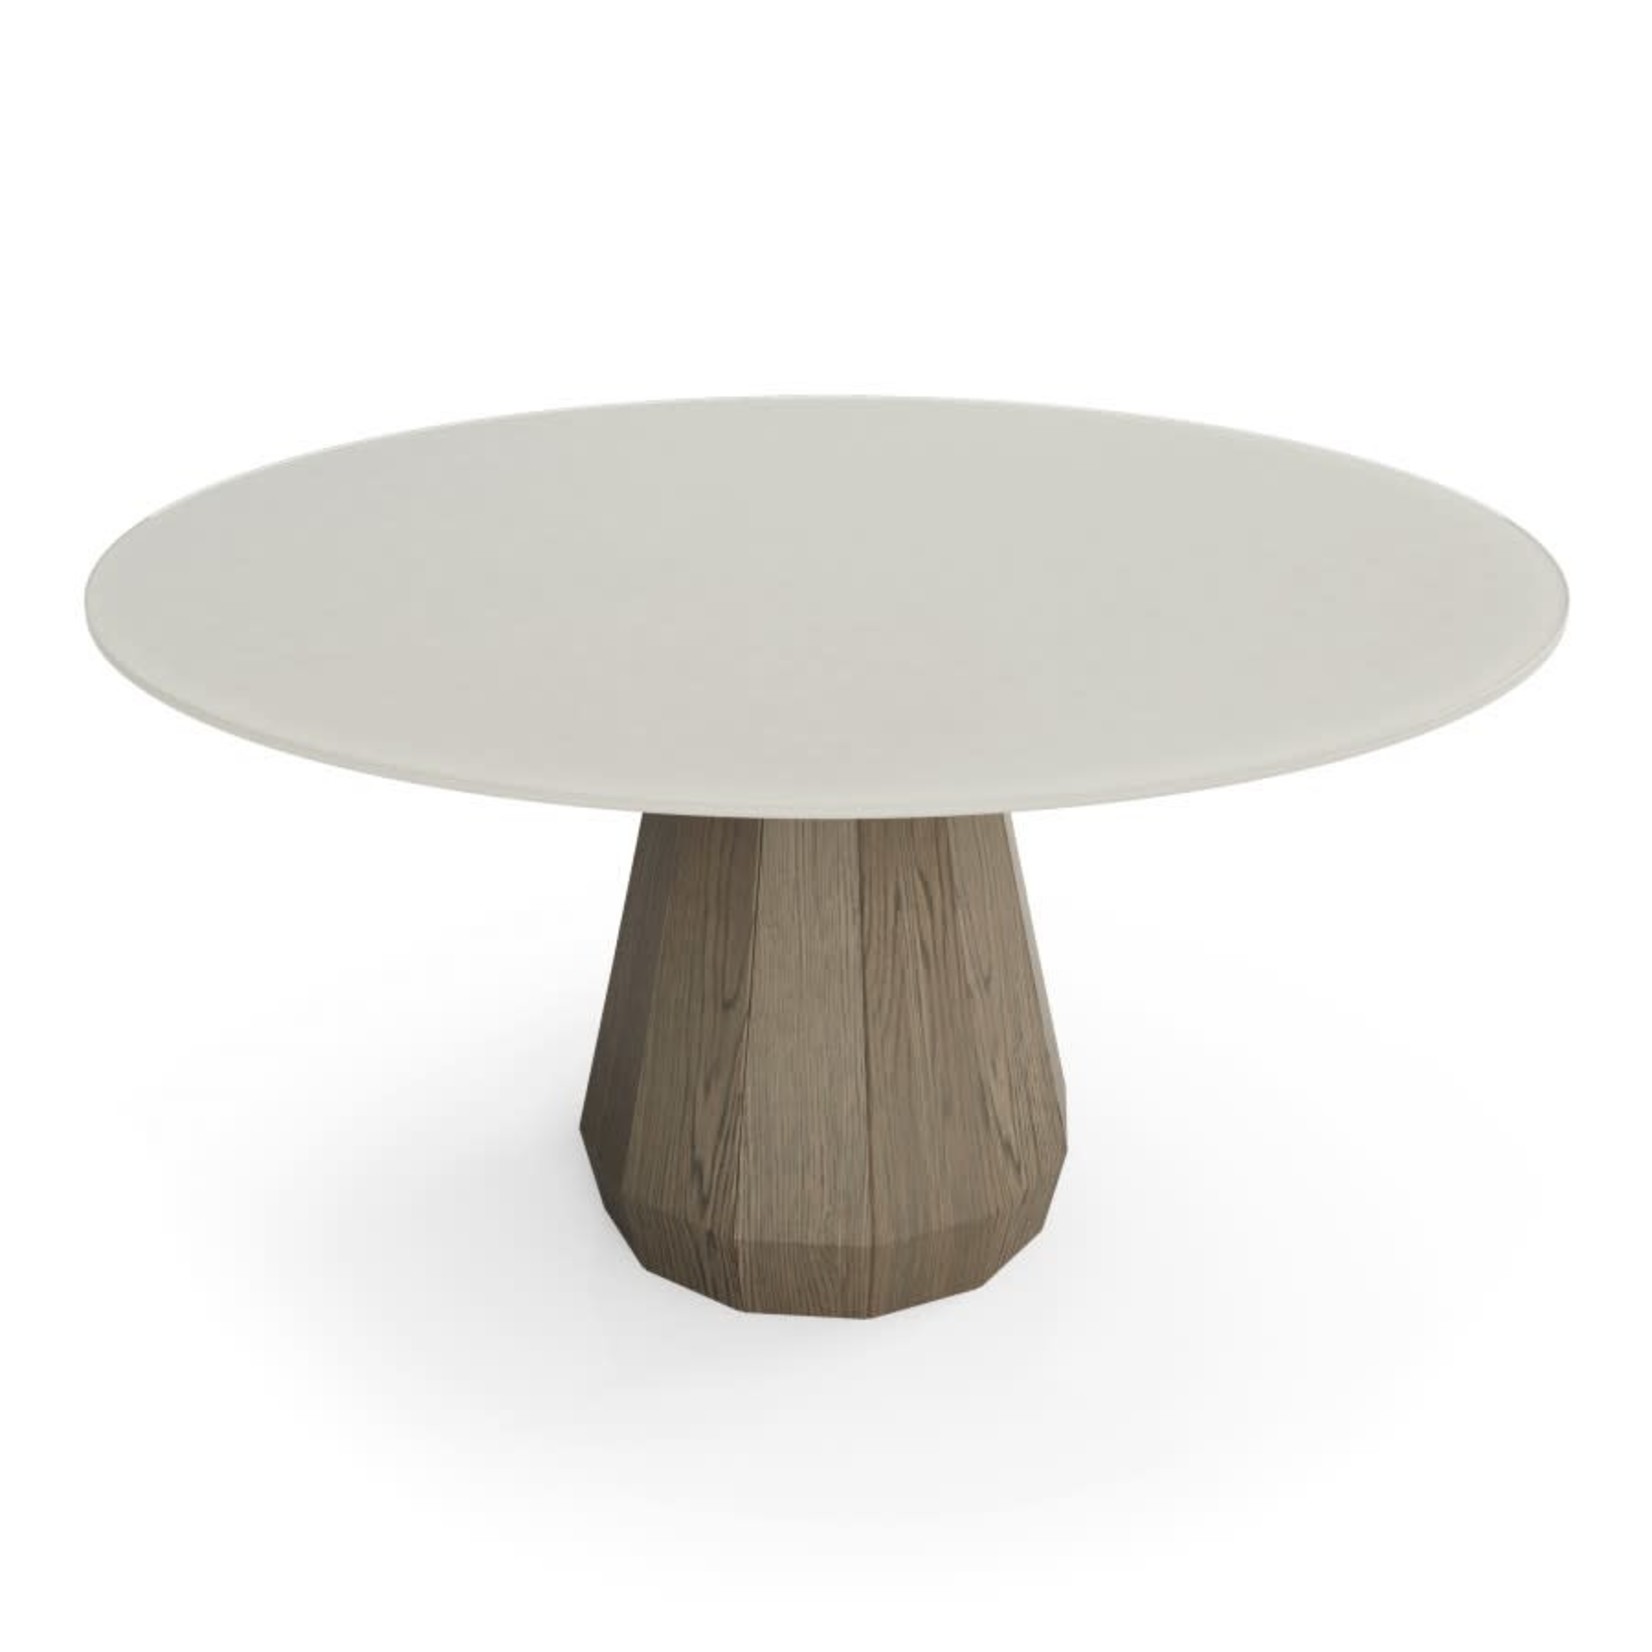 Huppe Memento 54" Round Table with Raw Oak Conical Base and White Etched Glass top